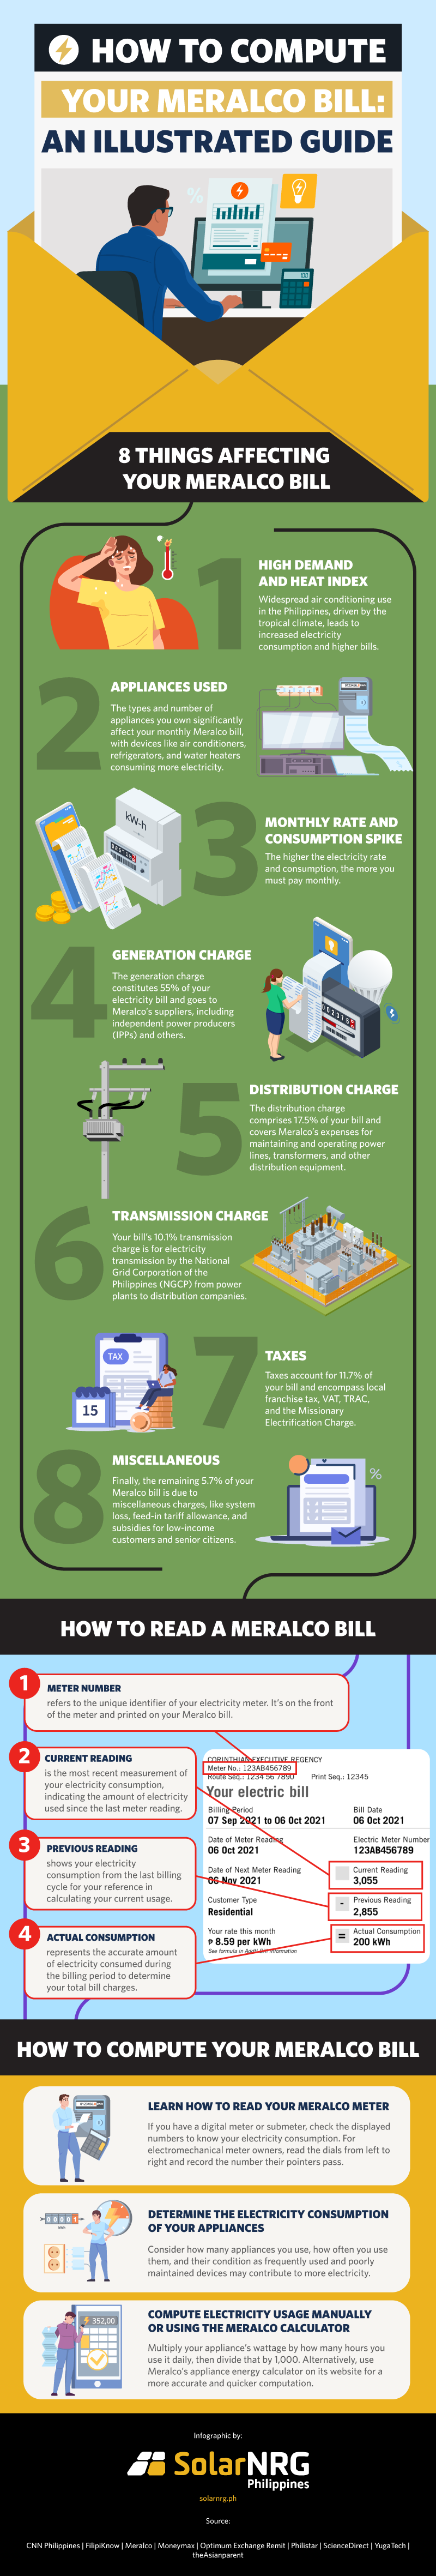 An infographic highlighting details regarding how to compute one's meralco bill.